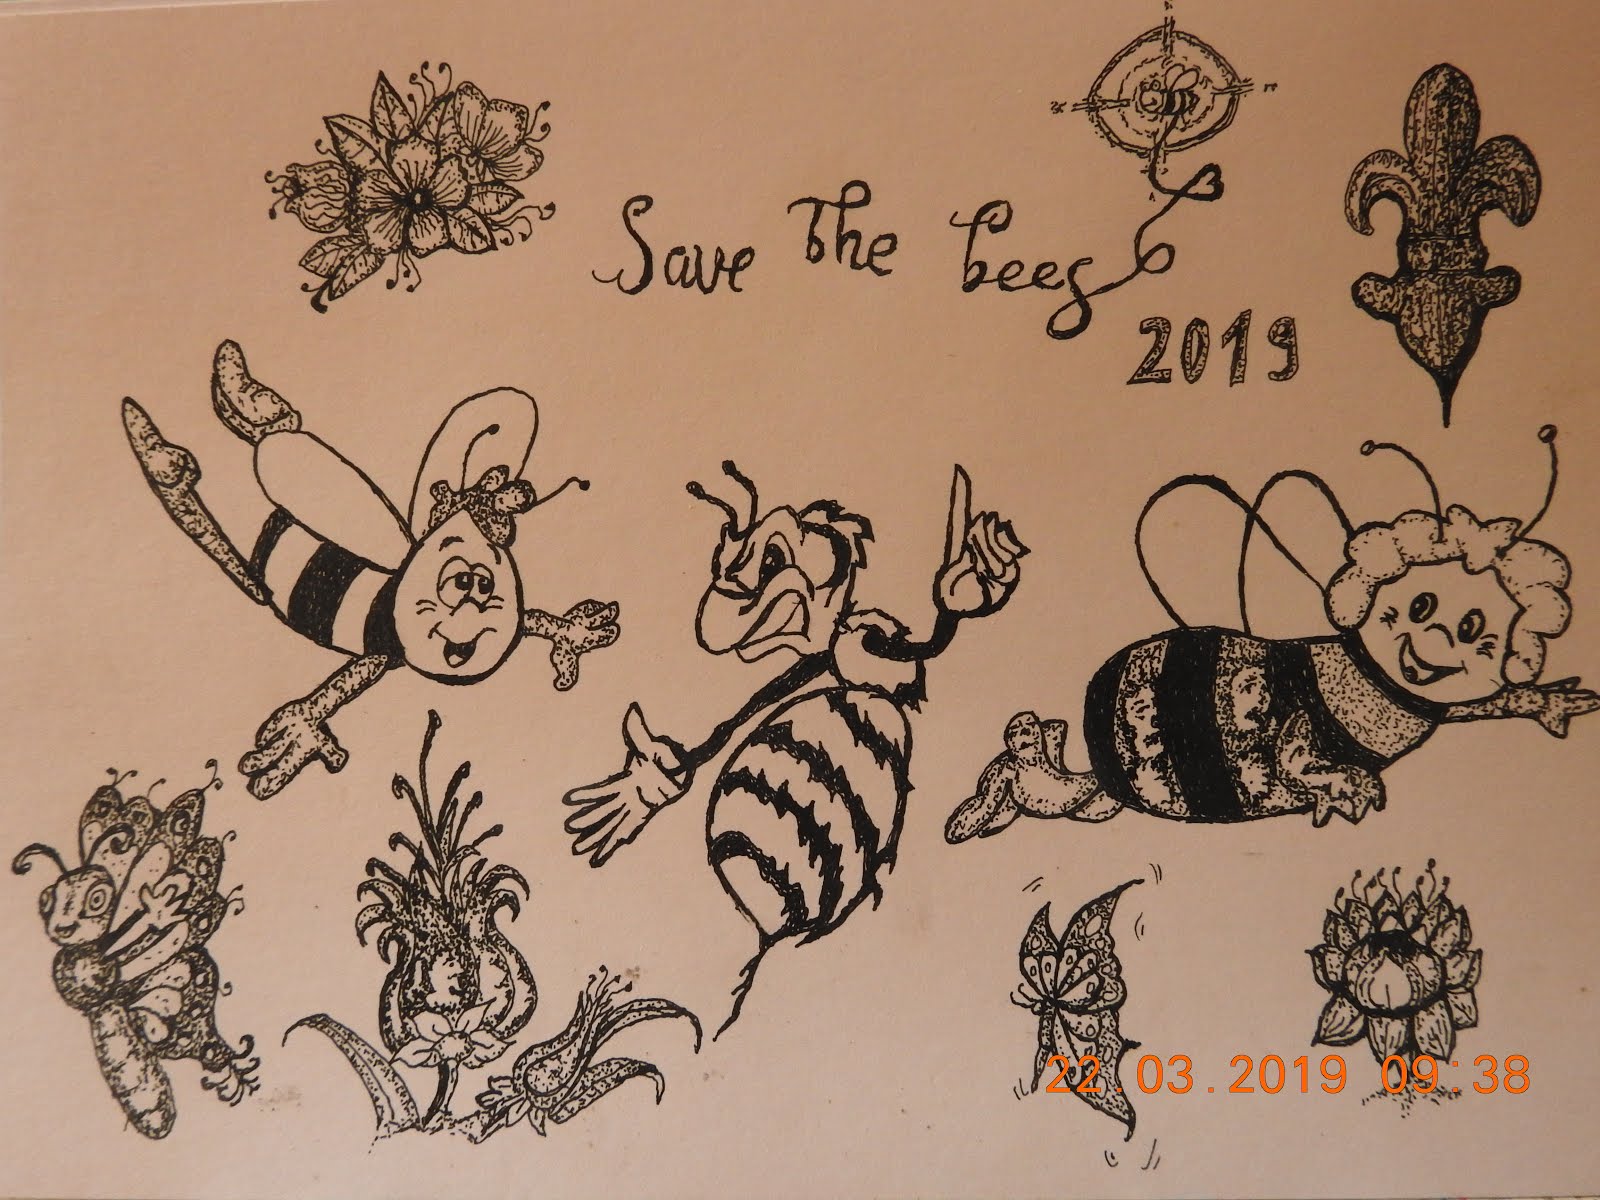 Save the bees , Sauvons les abeilles